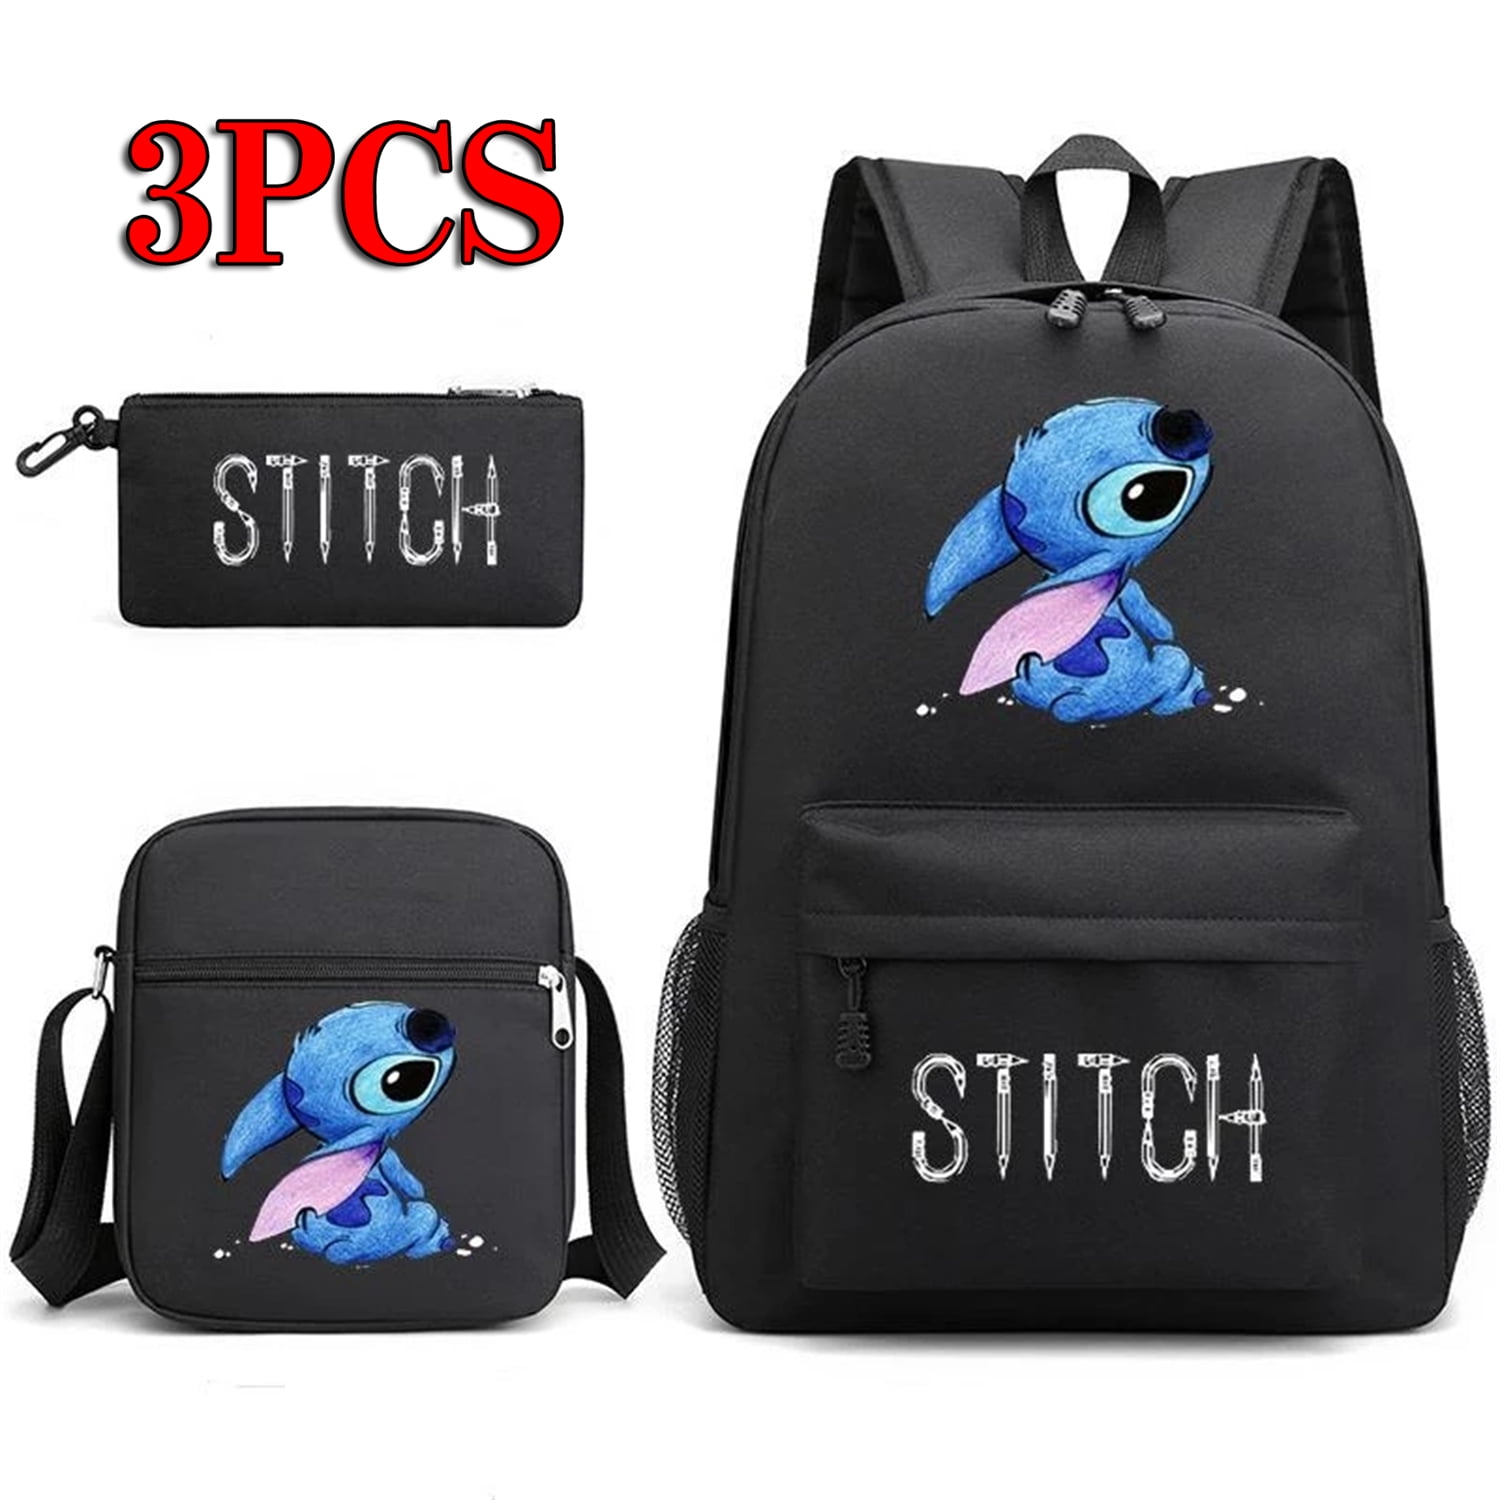 3PCS Fashion Cute Stitch Backpack Children Bookbag School Backpack for  Travel for Students, Schoolbag for Boys Girls Kids Children Bookbag Casual  with